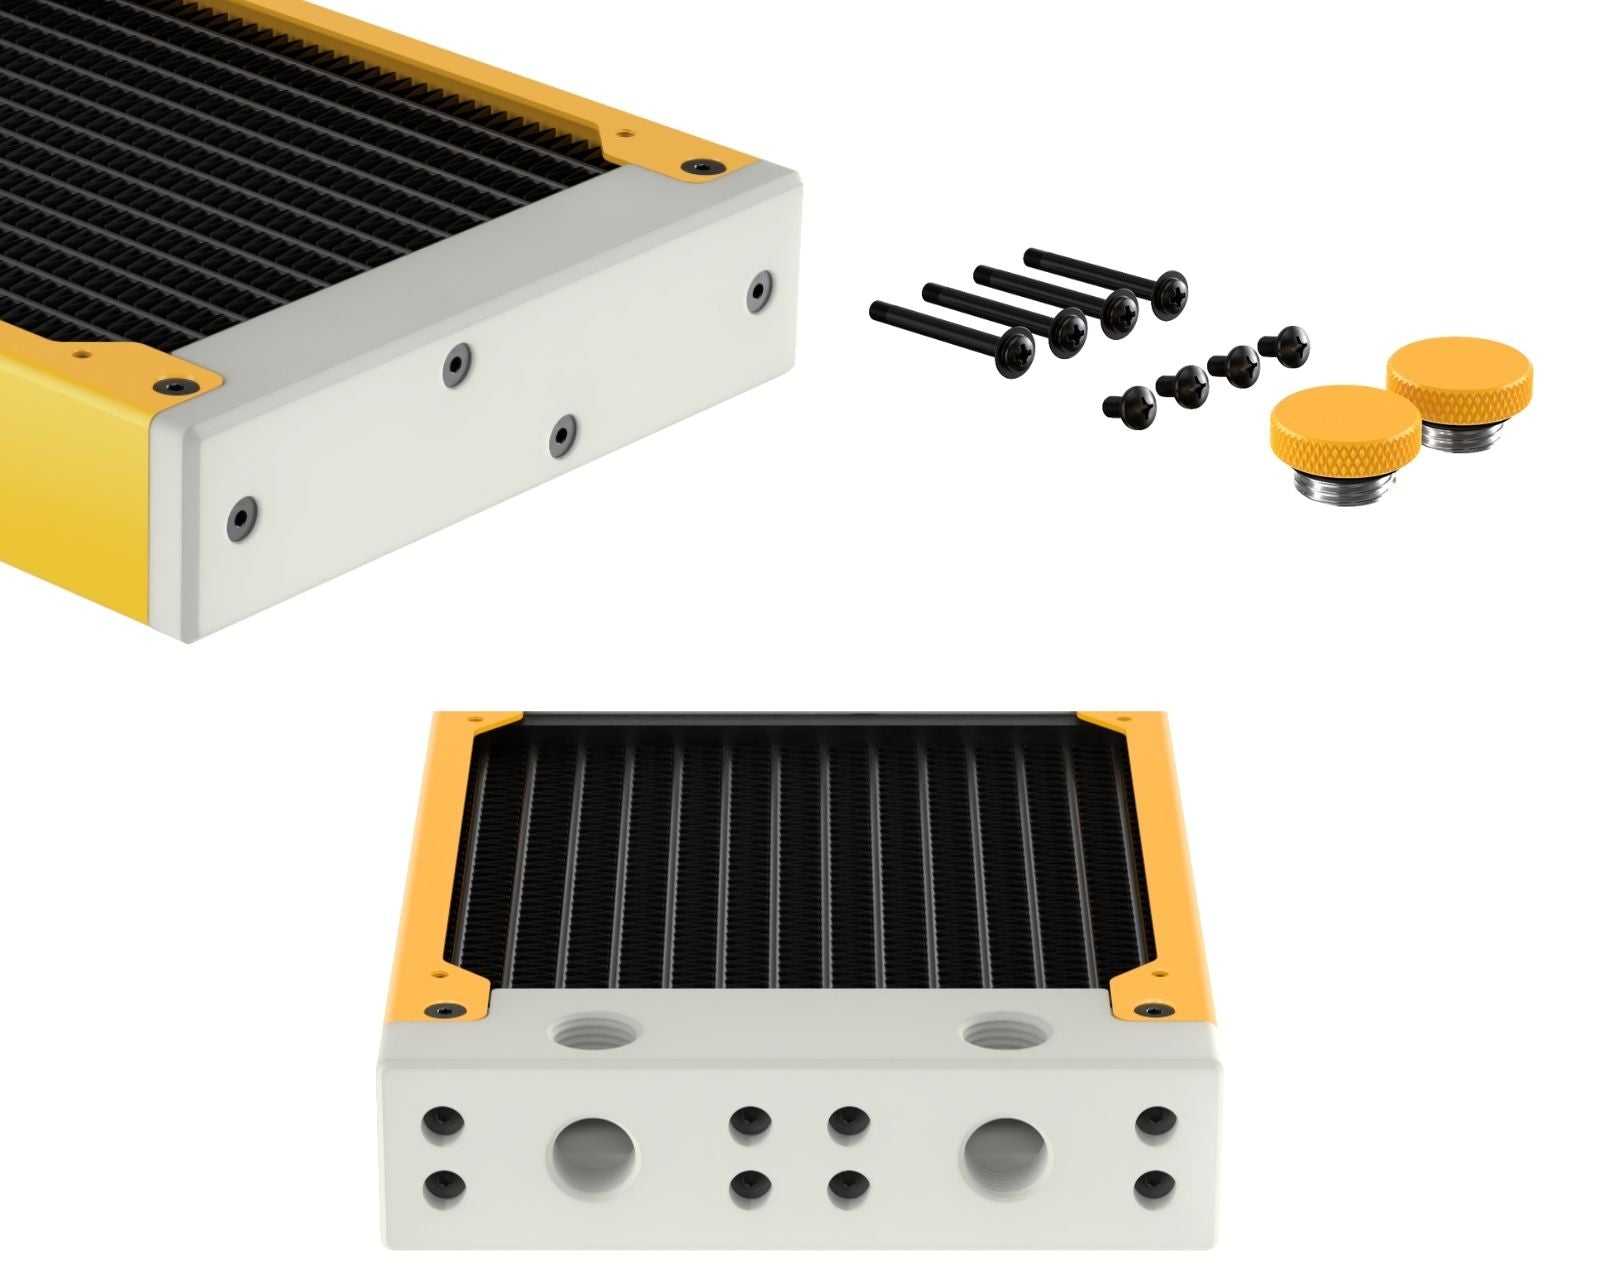 PrimoChill 120SL (30mm) EXIMO Modular Radiator, White POM, 1x120mm, Single Fan (R-SL-W12) Available in 20+ Colors, Assembled in USA and Custom Watercooling Loop Ready - Yellow